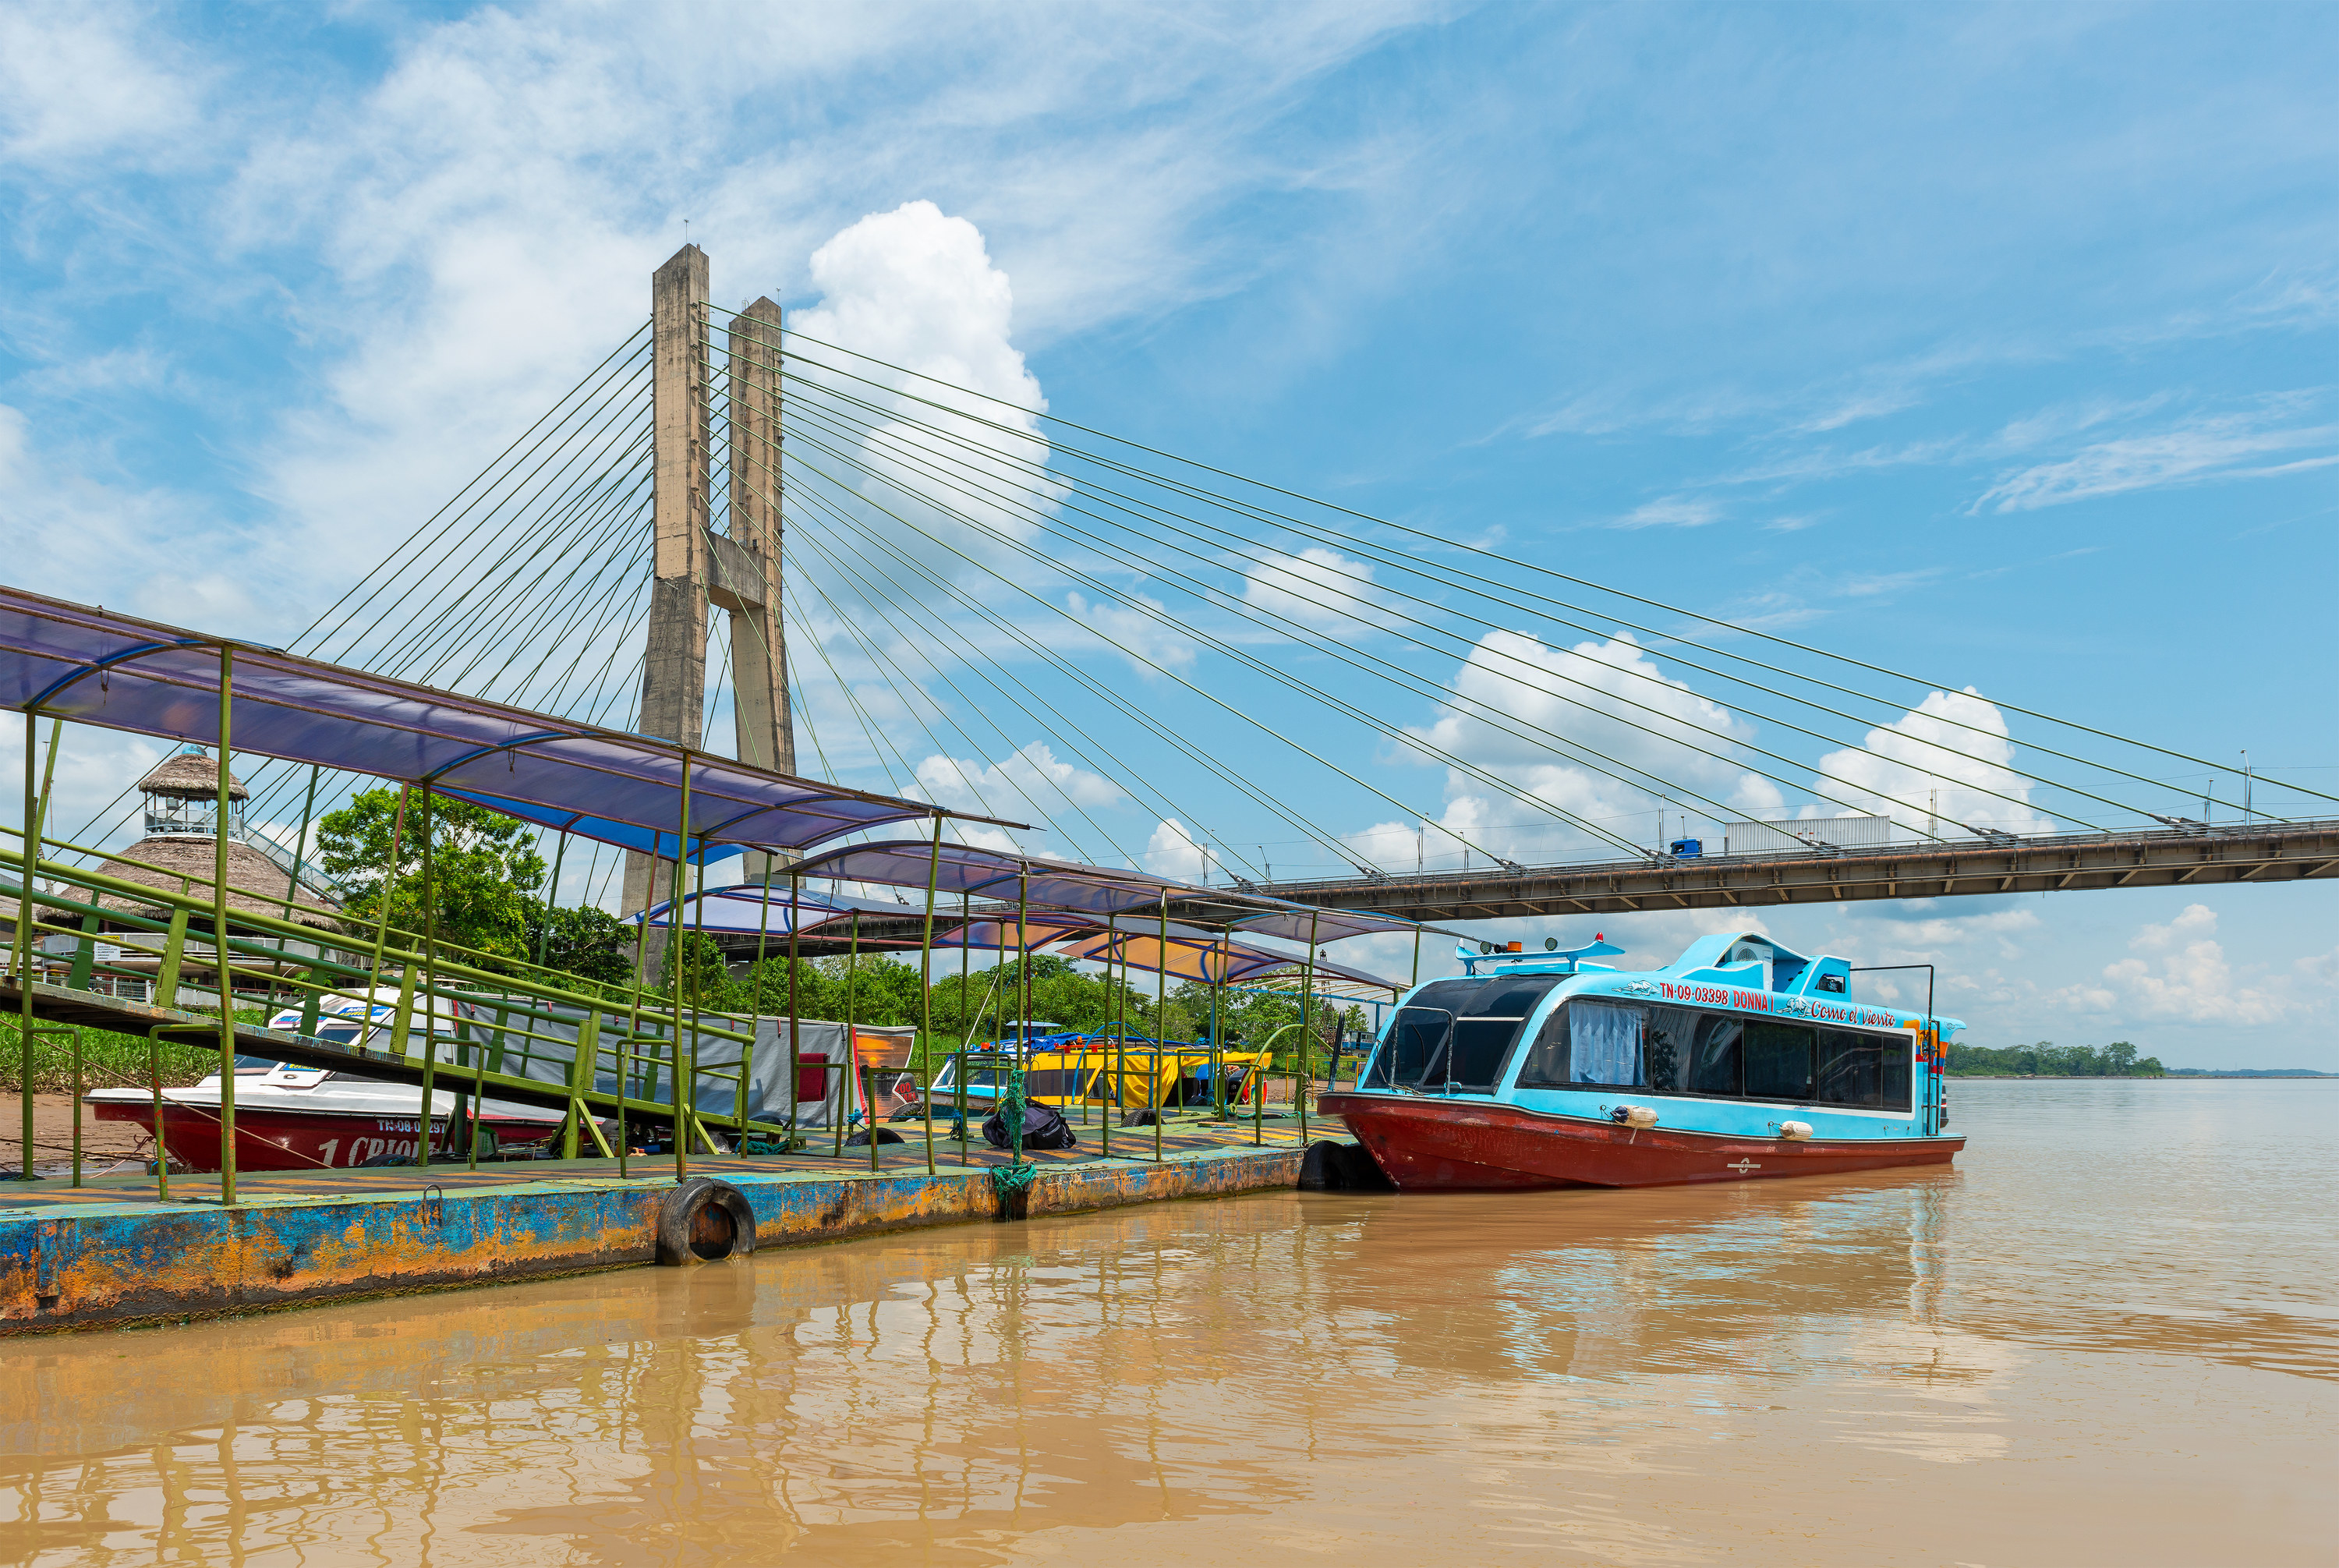 Suspension bridge over a river with a tourist boat docked